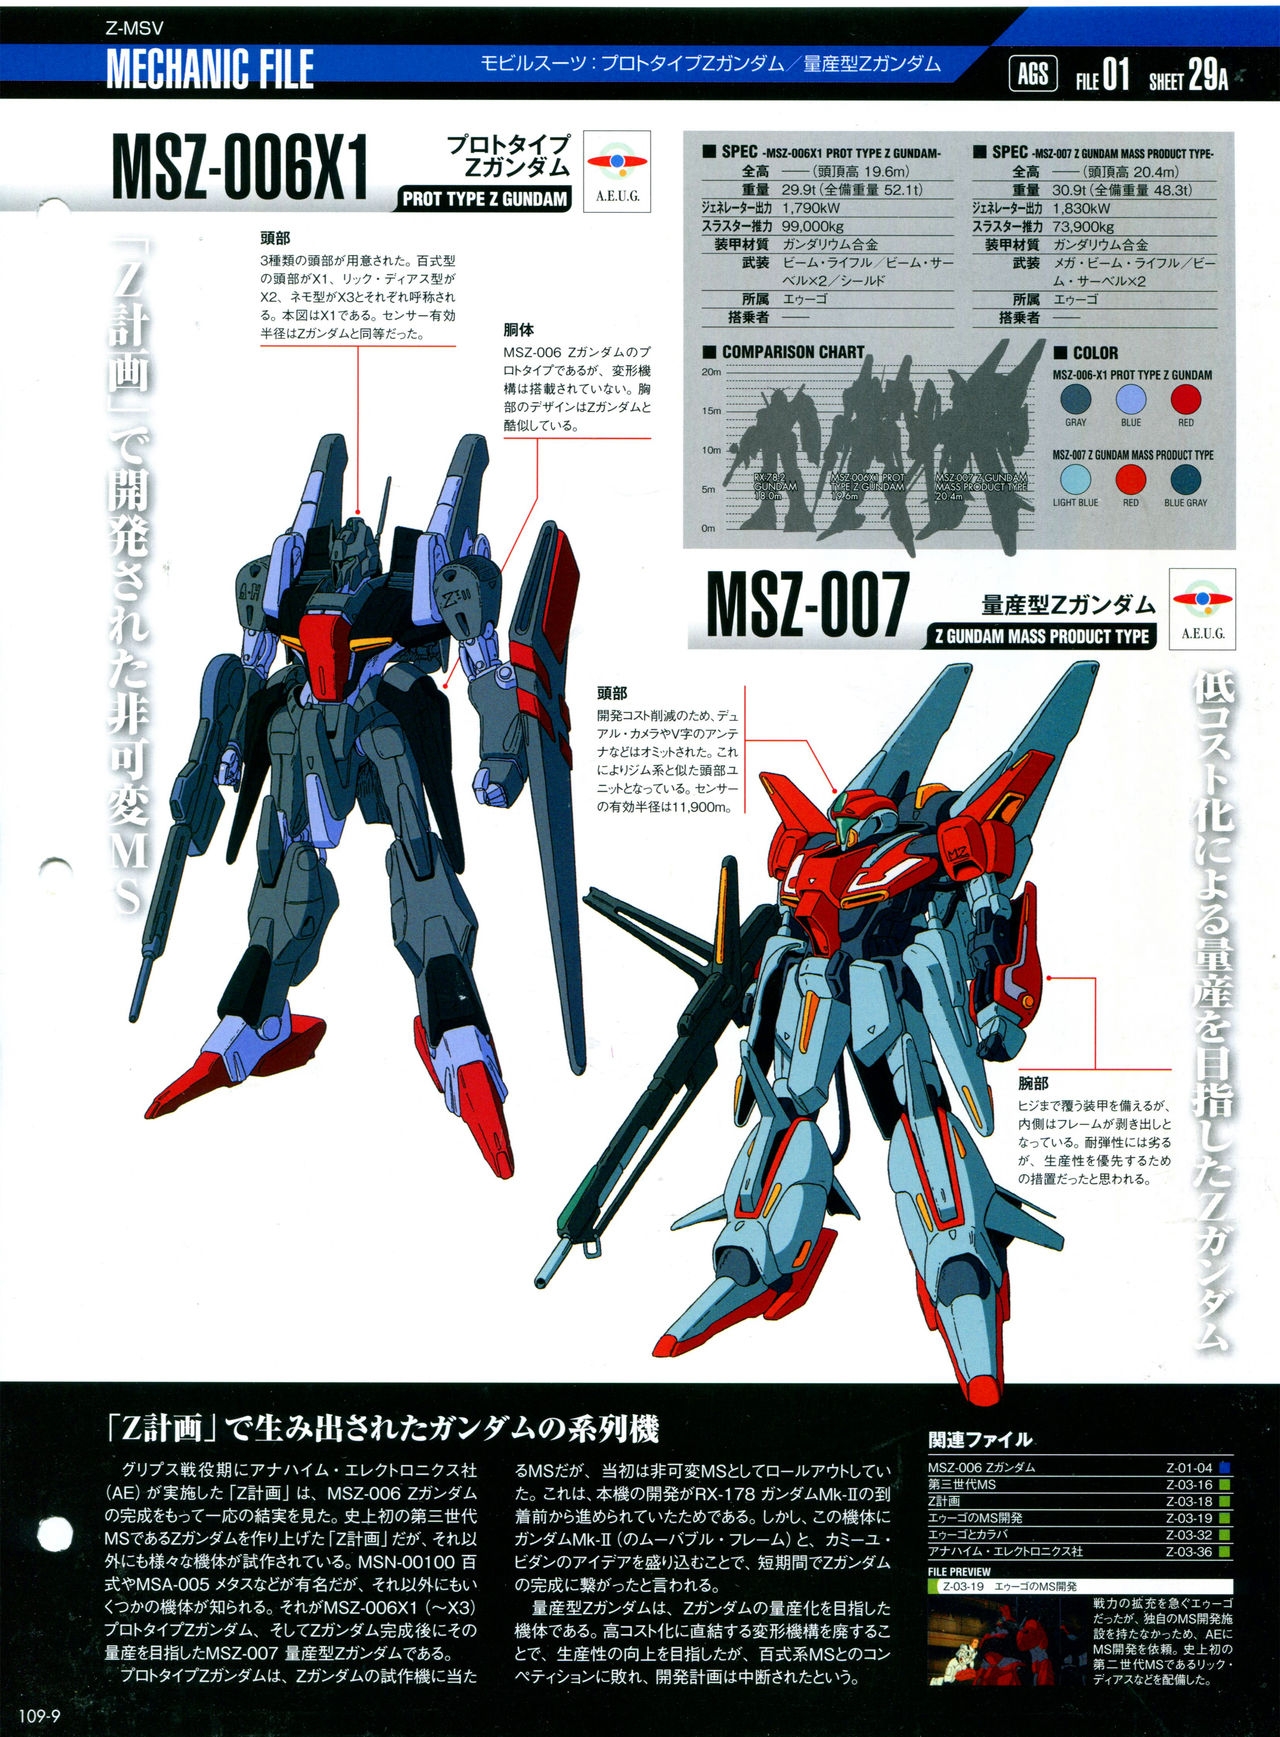 The Official Gundam Perfect File No.109 12